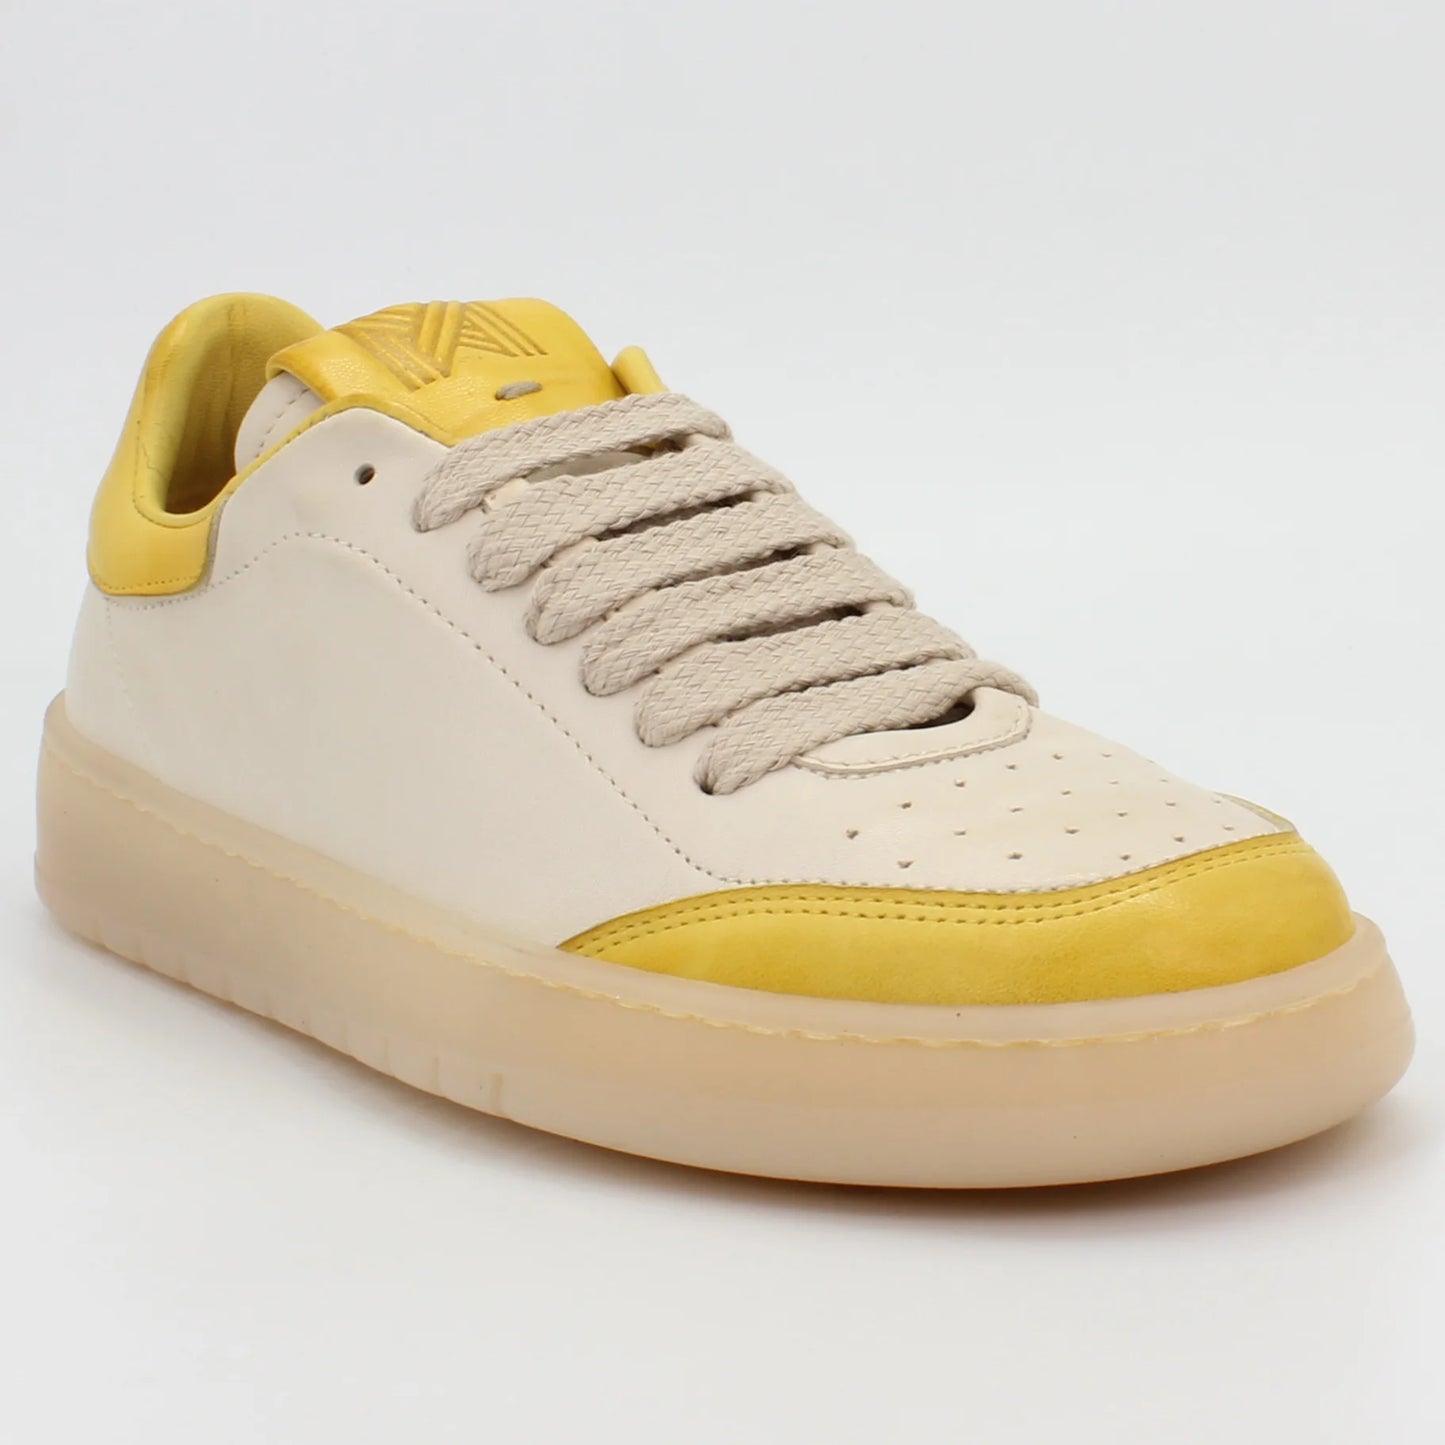 Shop Handmade Italian Leather sneaker in natur yellow (GRD704) or browse our range of hand-made Italian shoes for men in leather or suede in-store at Aliverti Cape Town, or shop online. We deliver in South Africa & offer multiple payment plans as well as accept multiple safe & secure payment methods.